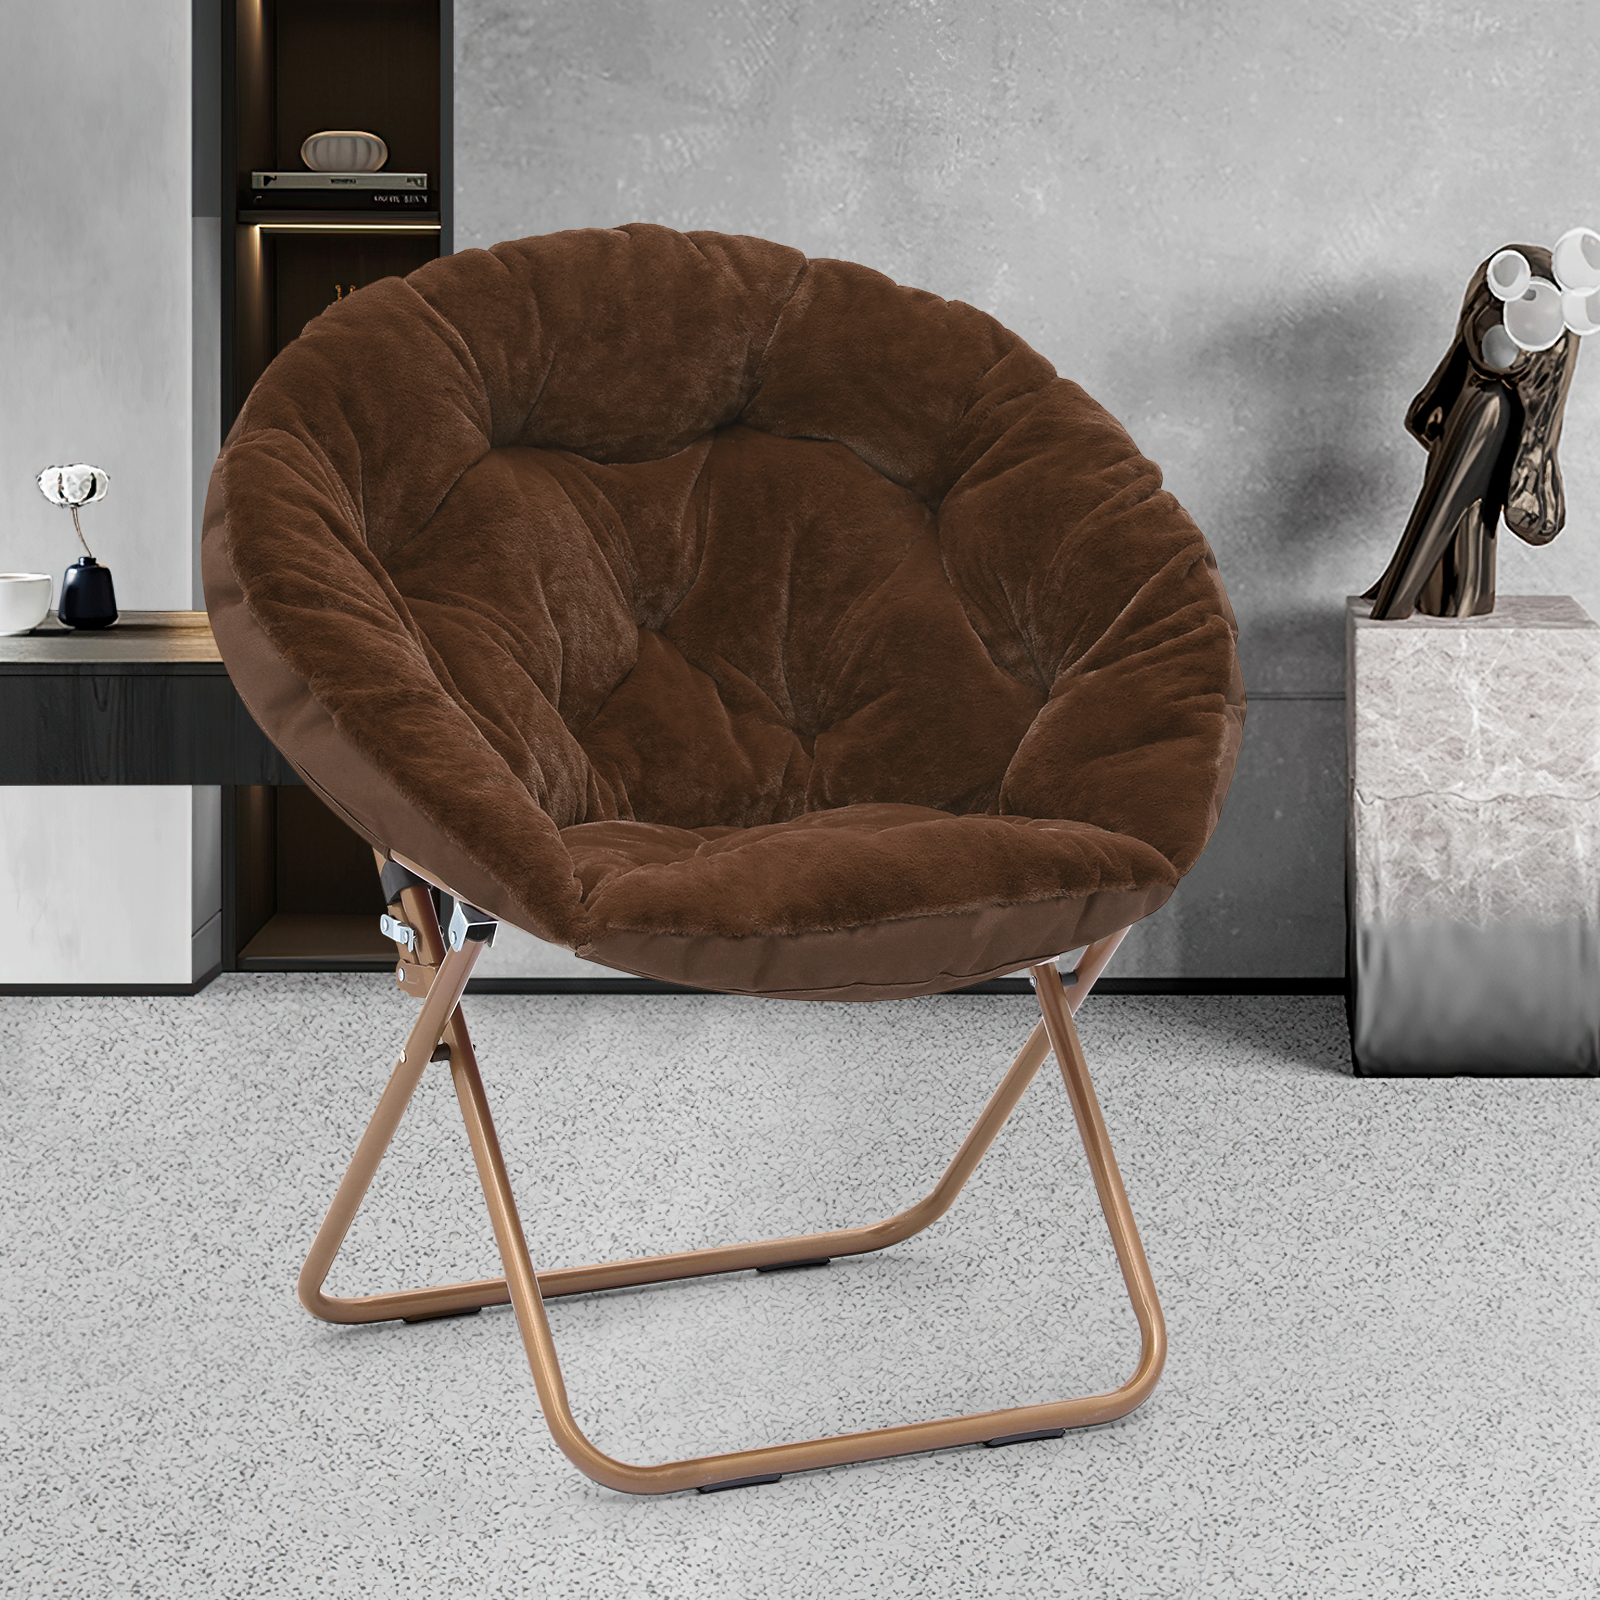 Magshion Folding Lounge Chair Comfy Faux Fur Saucer Chair, Cozy Moon Chair Seating with Metal Frame for Home Living Room Bedroom, Brown - image 3 of 10